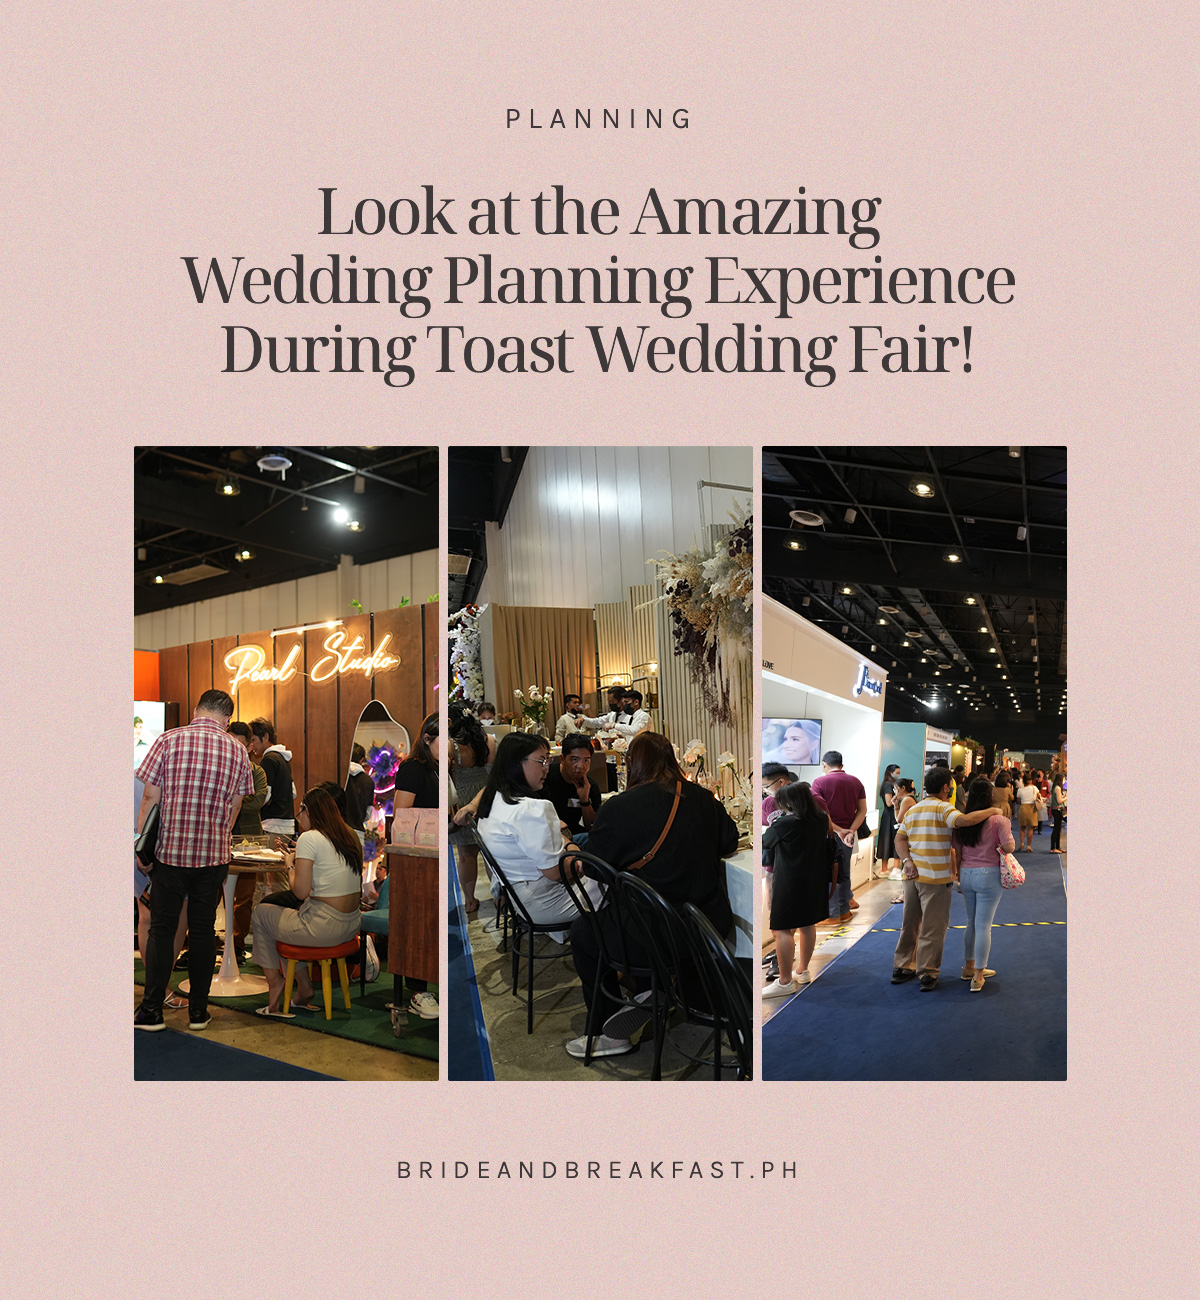 Look at the Amazing Wedding Planning Experience During Toast Wedding Fair